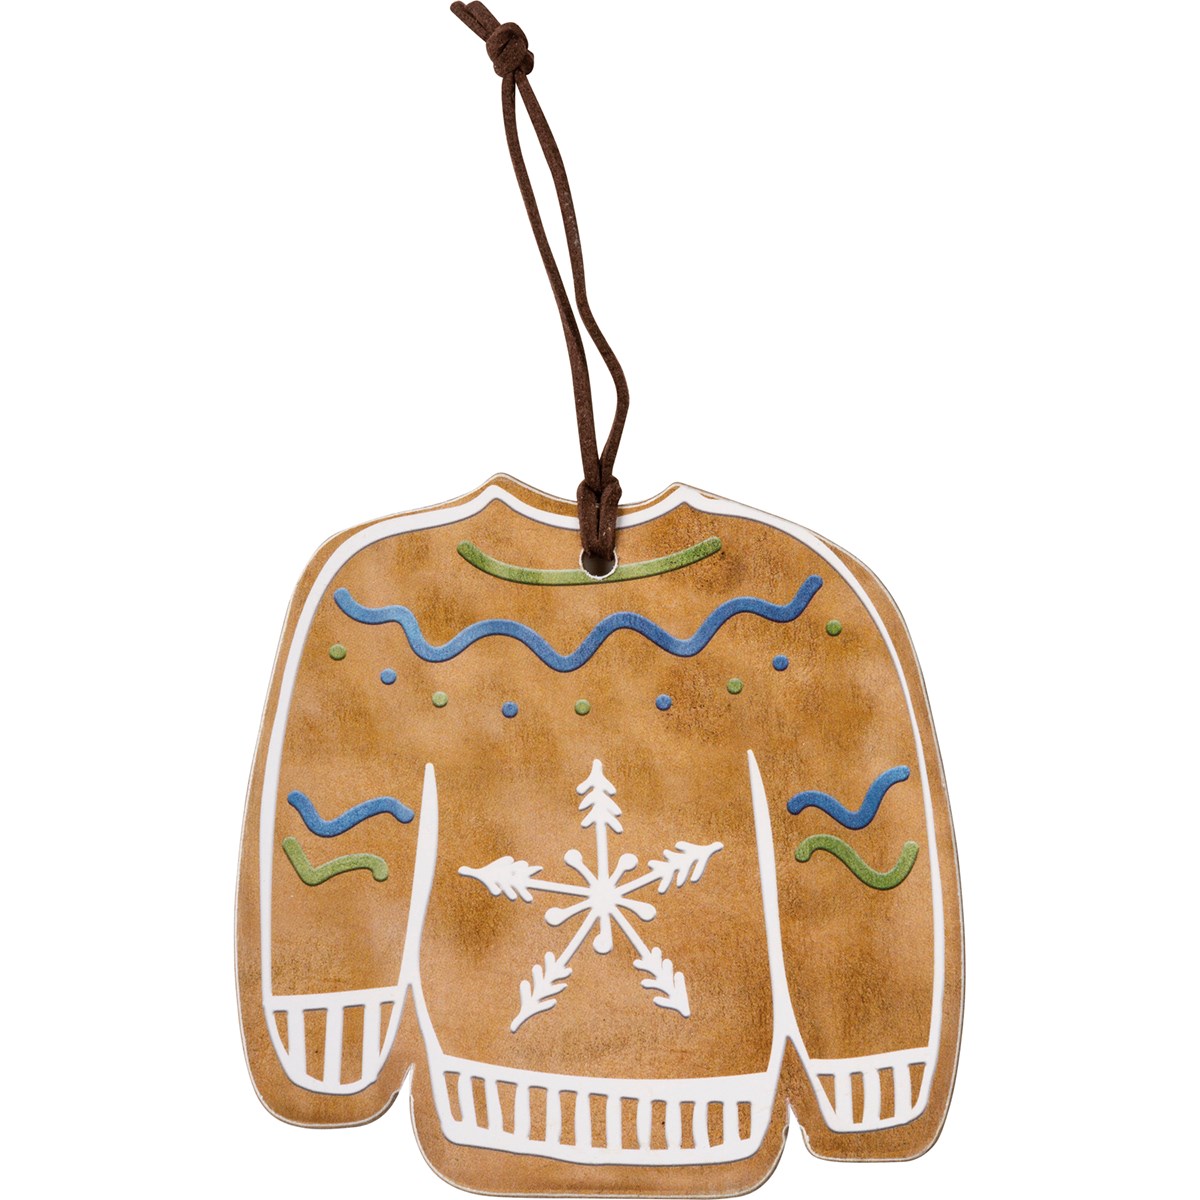 Gingerbread Ornament Set - Wood, Paper, Leather